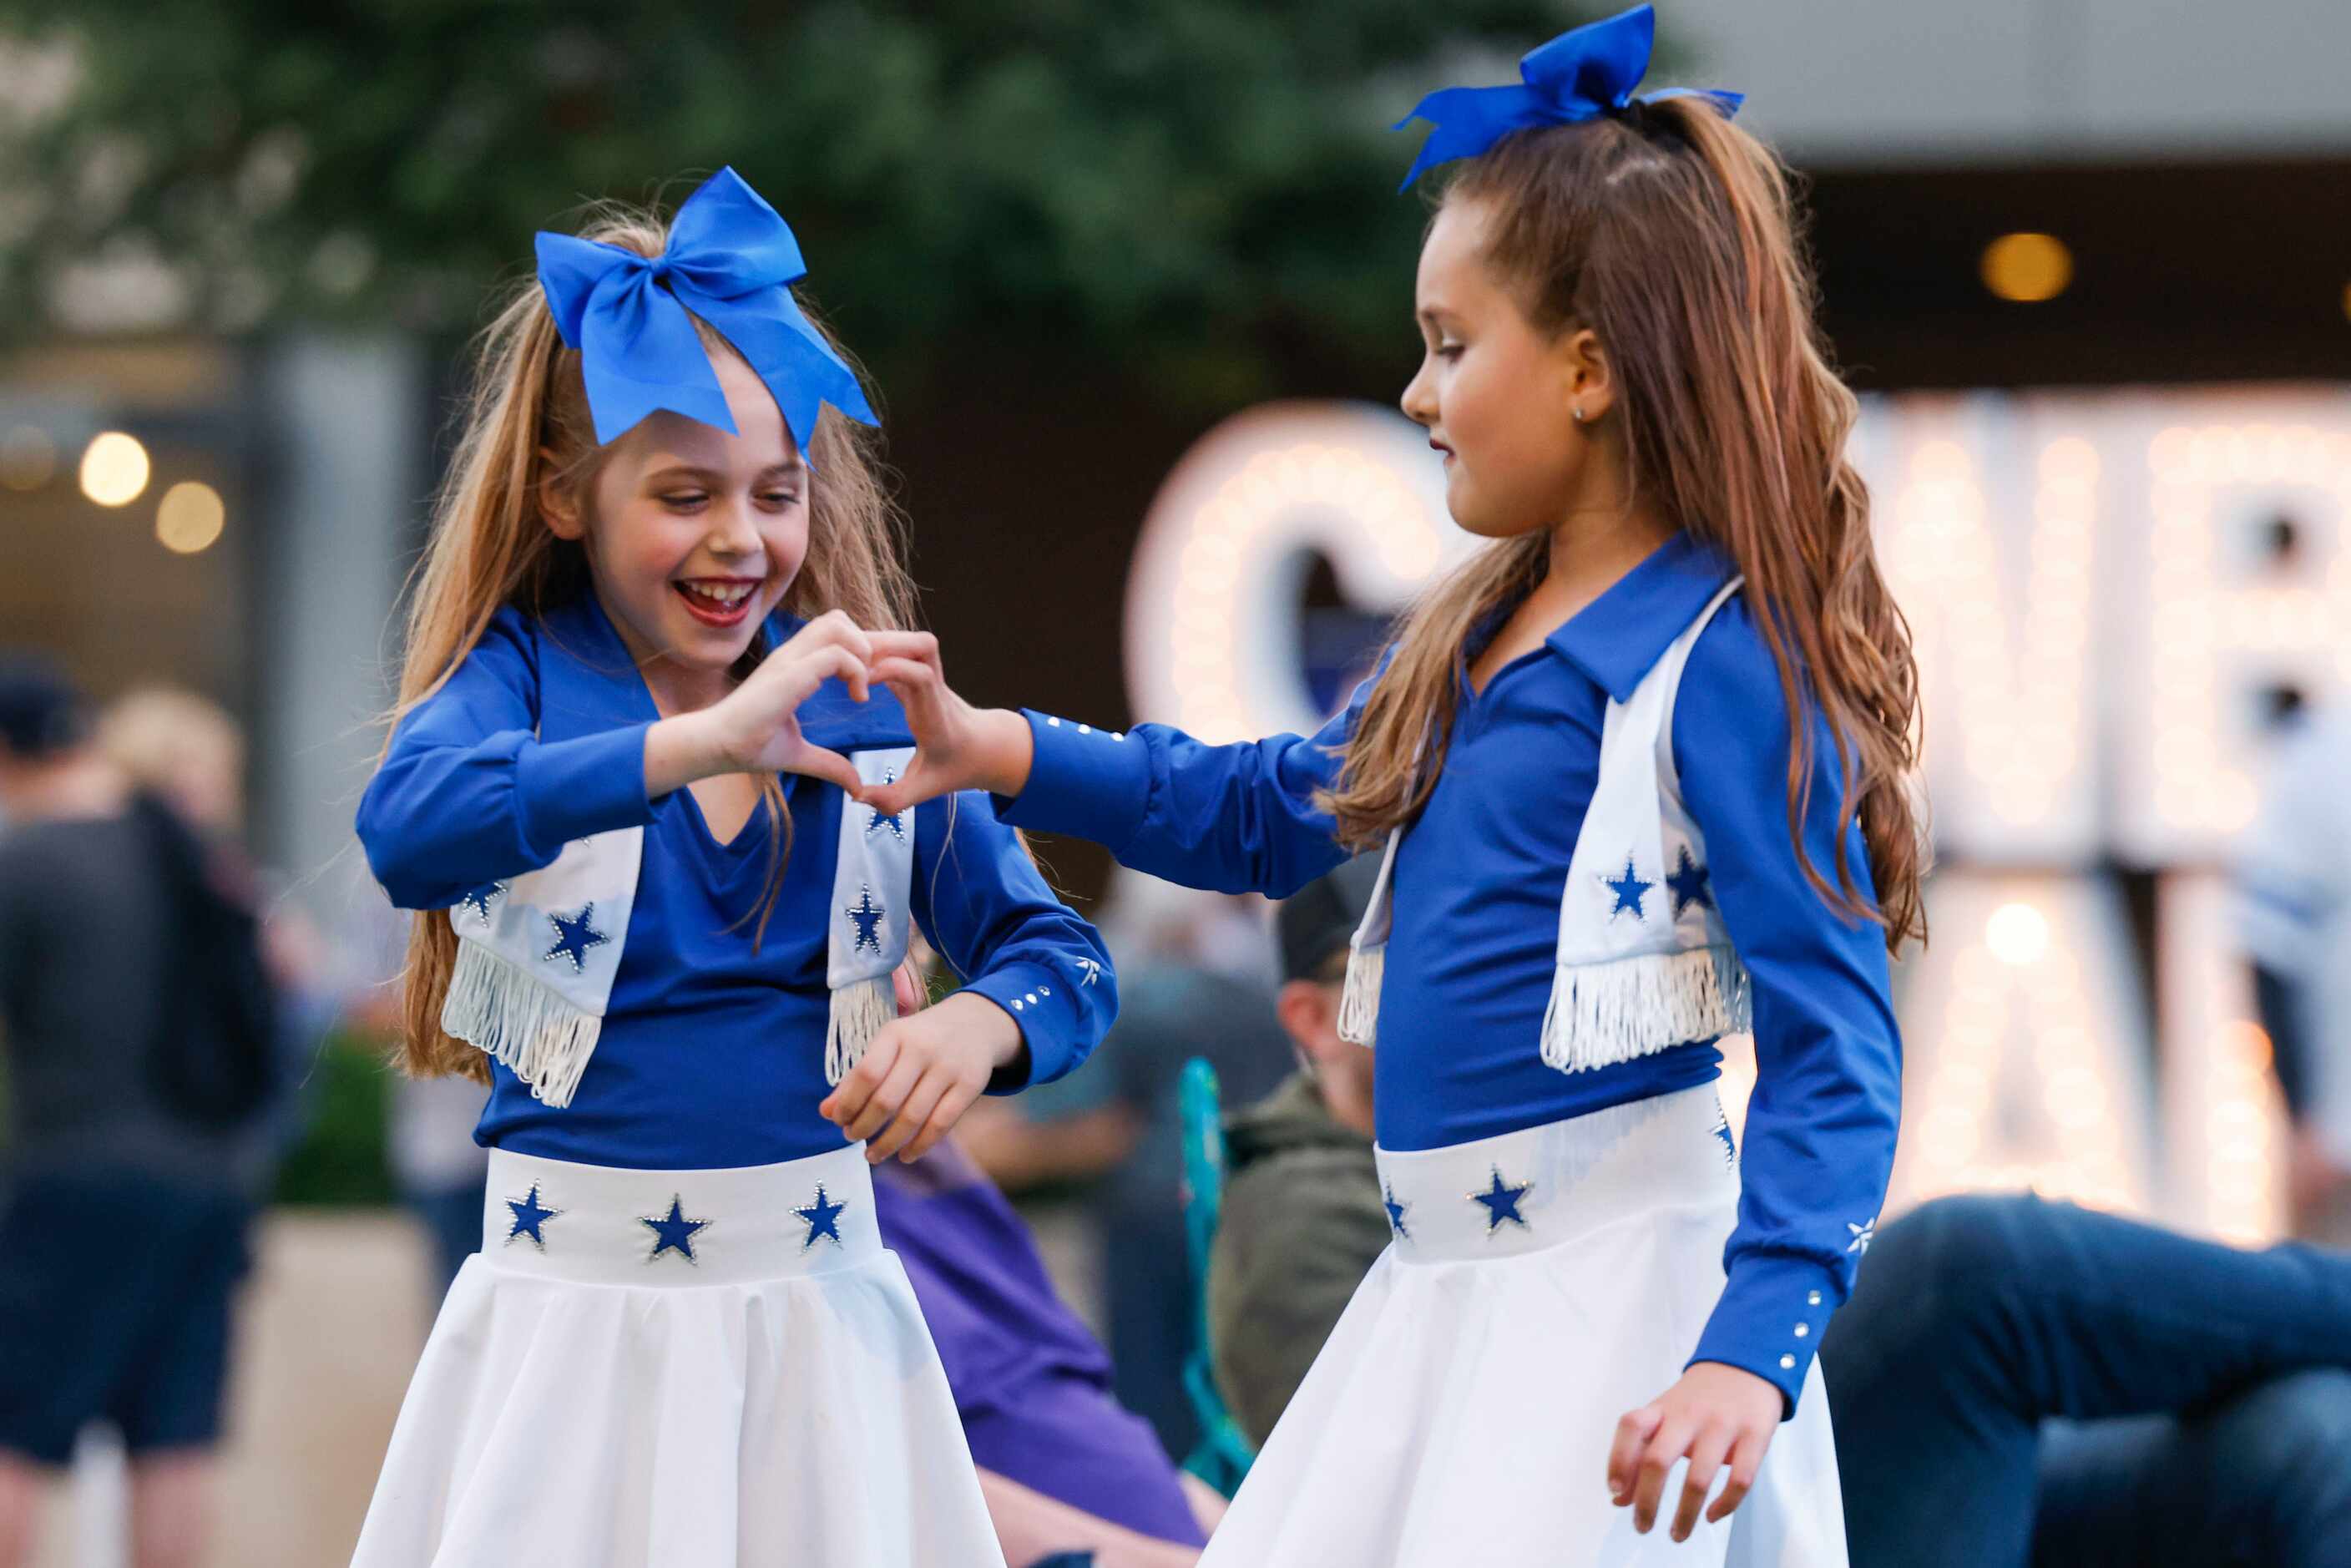 Hannah Paulek, 9, (left) gestures a heart sign with her friend Amelia Purdue, 9, as they...